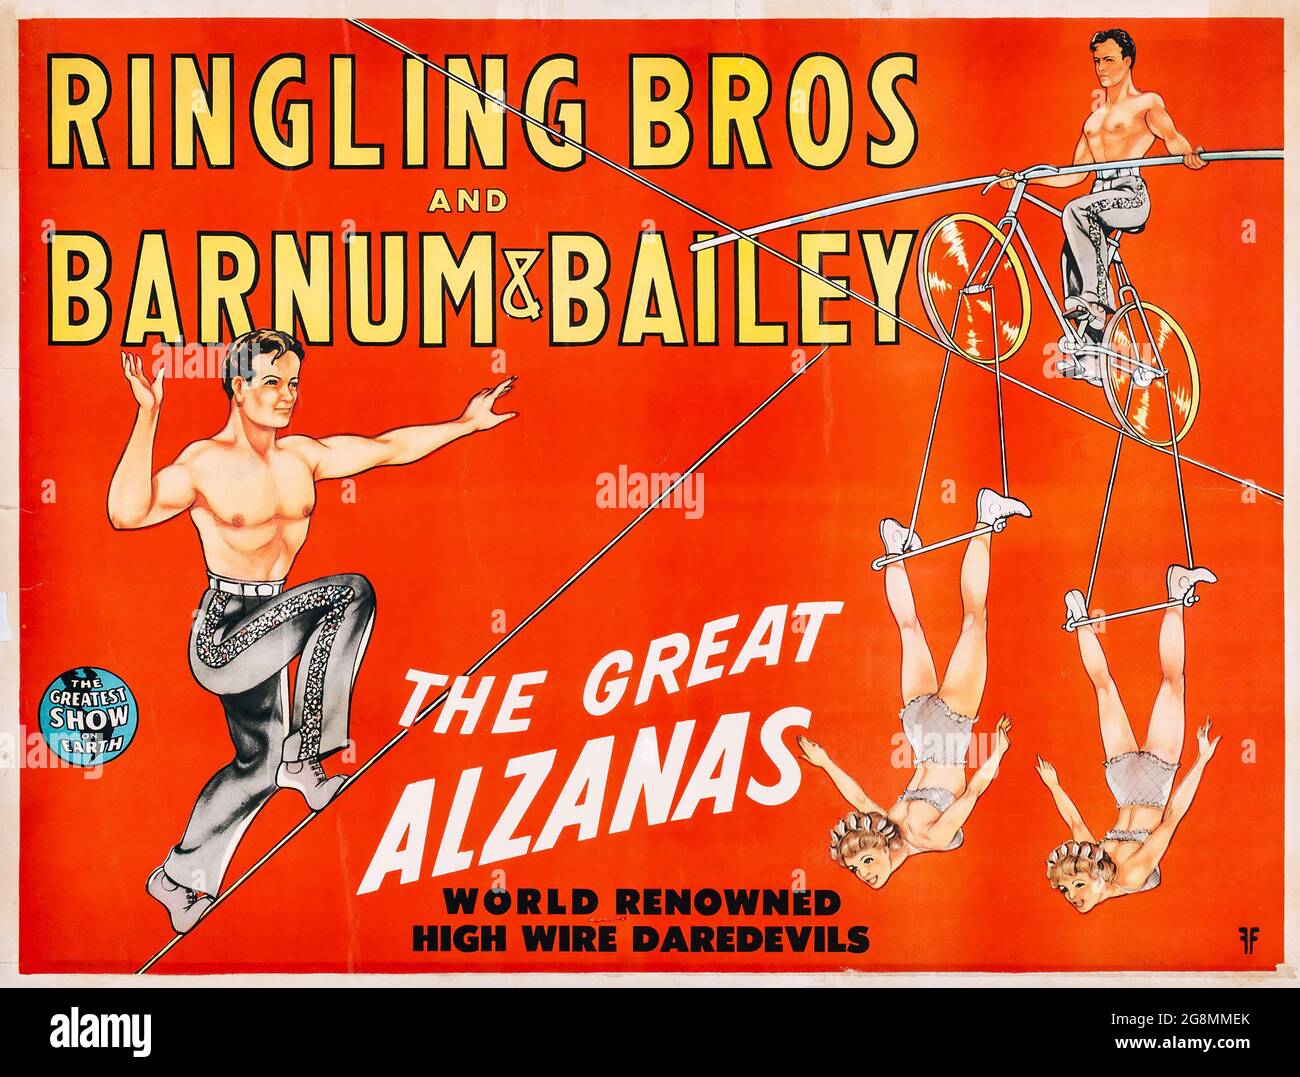 Ringling Bros and Barnum & Bailey. The Great Alzanas. World Renowned High Wire Daredevils. 1940s. Stock Photo